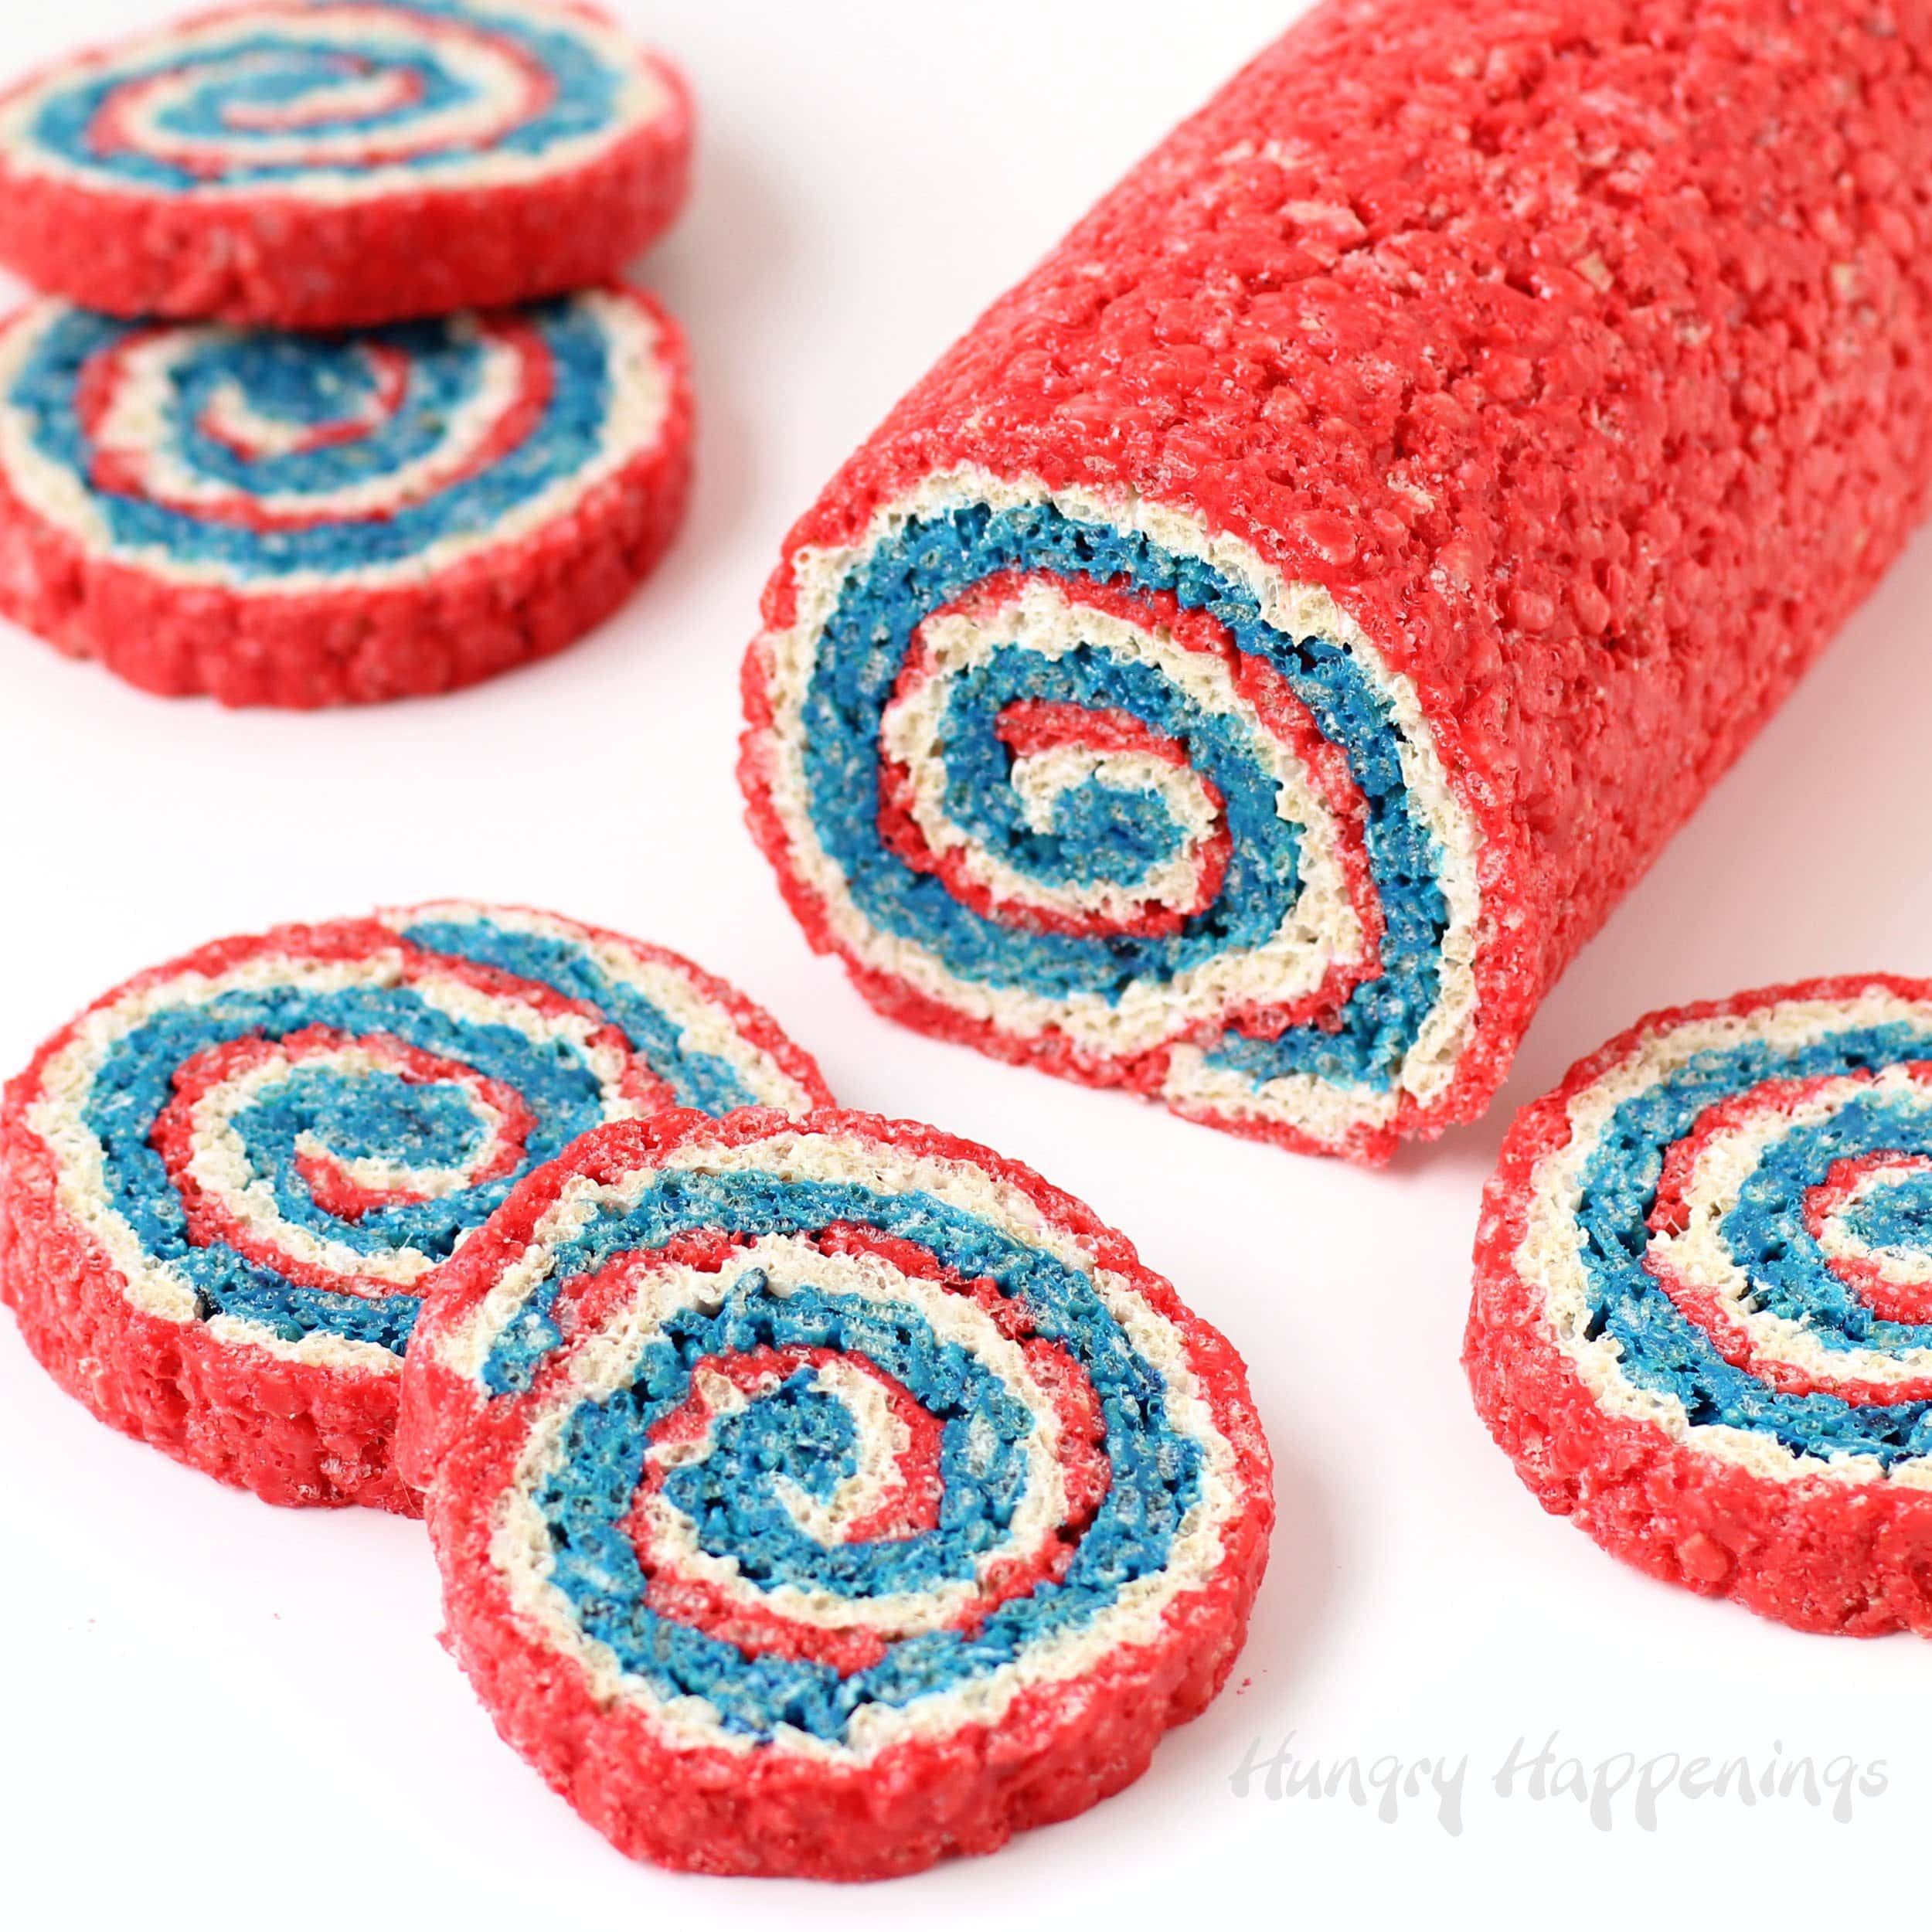 Celebrate the 4th of July, Memorial Day, Veterans Day, or Labor Day with these festive Red, White and Blue Rice Krispie Treat Pinwheels.